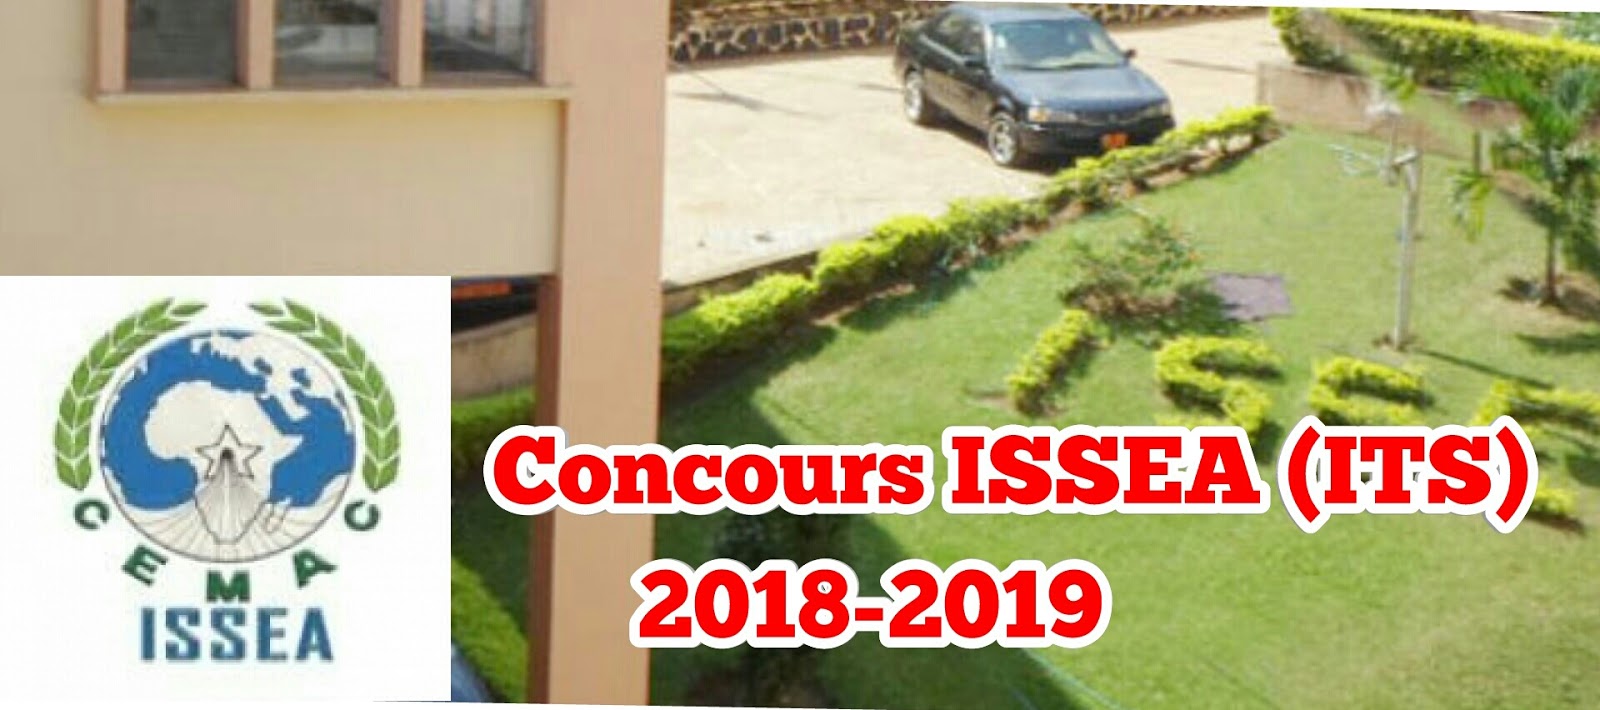 CAPESA Concours ISSEA (ITS) 2018-2019